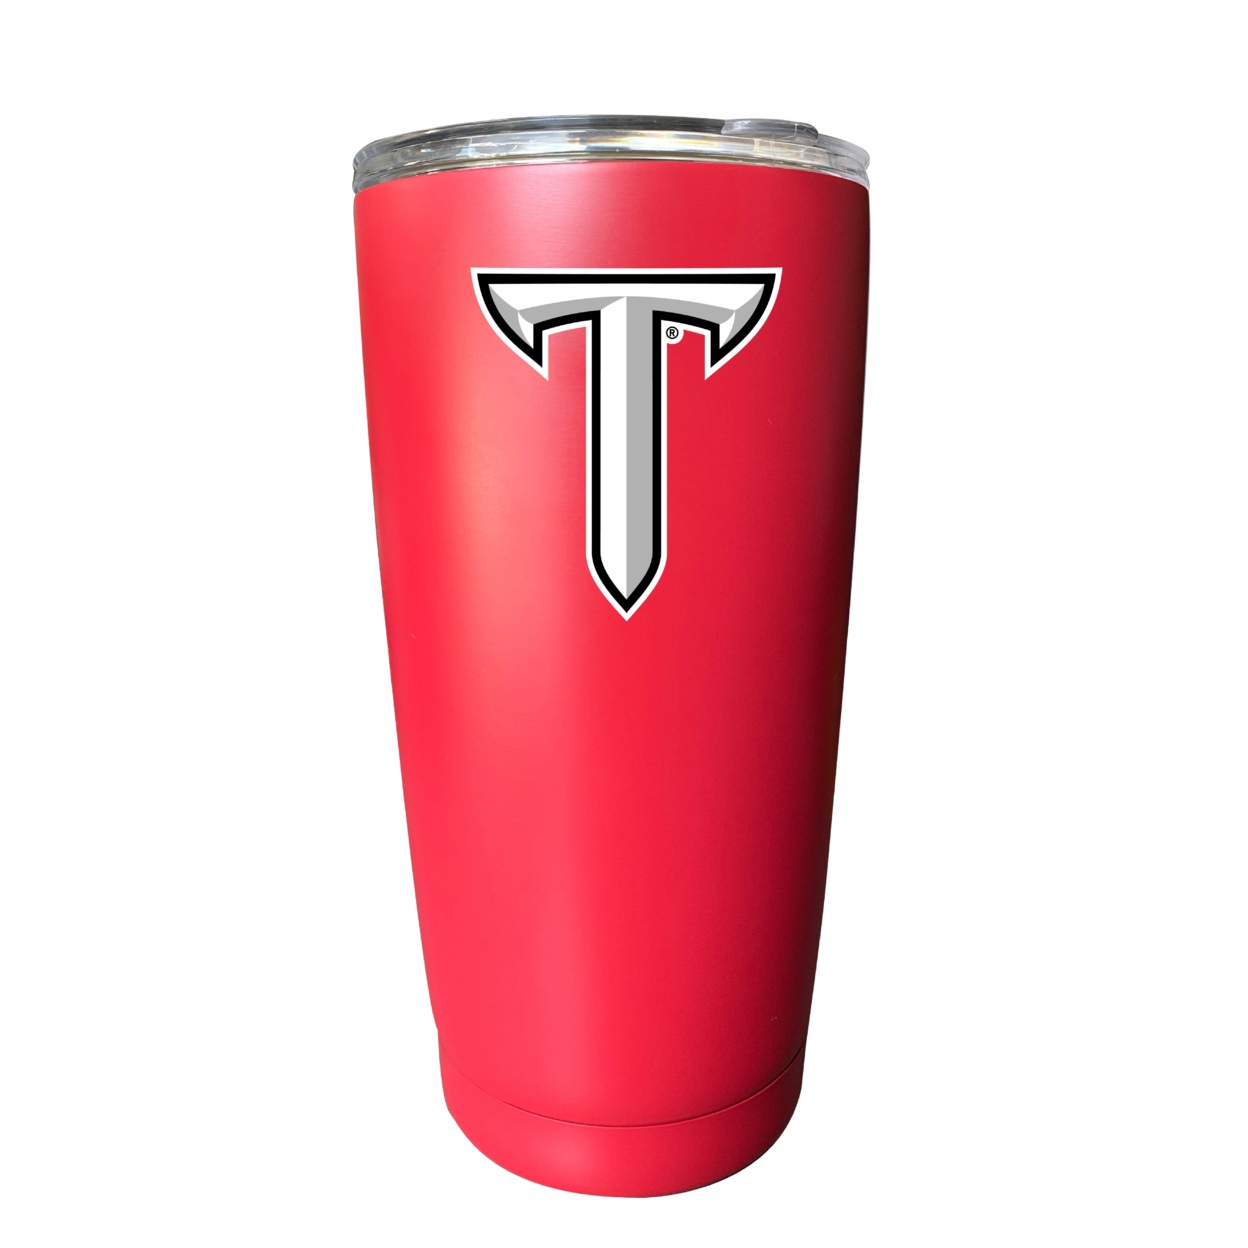 Troy University 16 Oz Insulated Stainless Steel Tumblers - Choose Your Color - Red